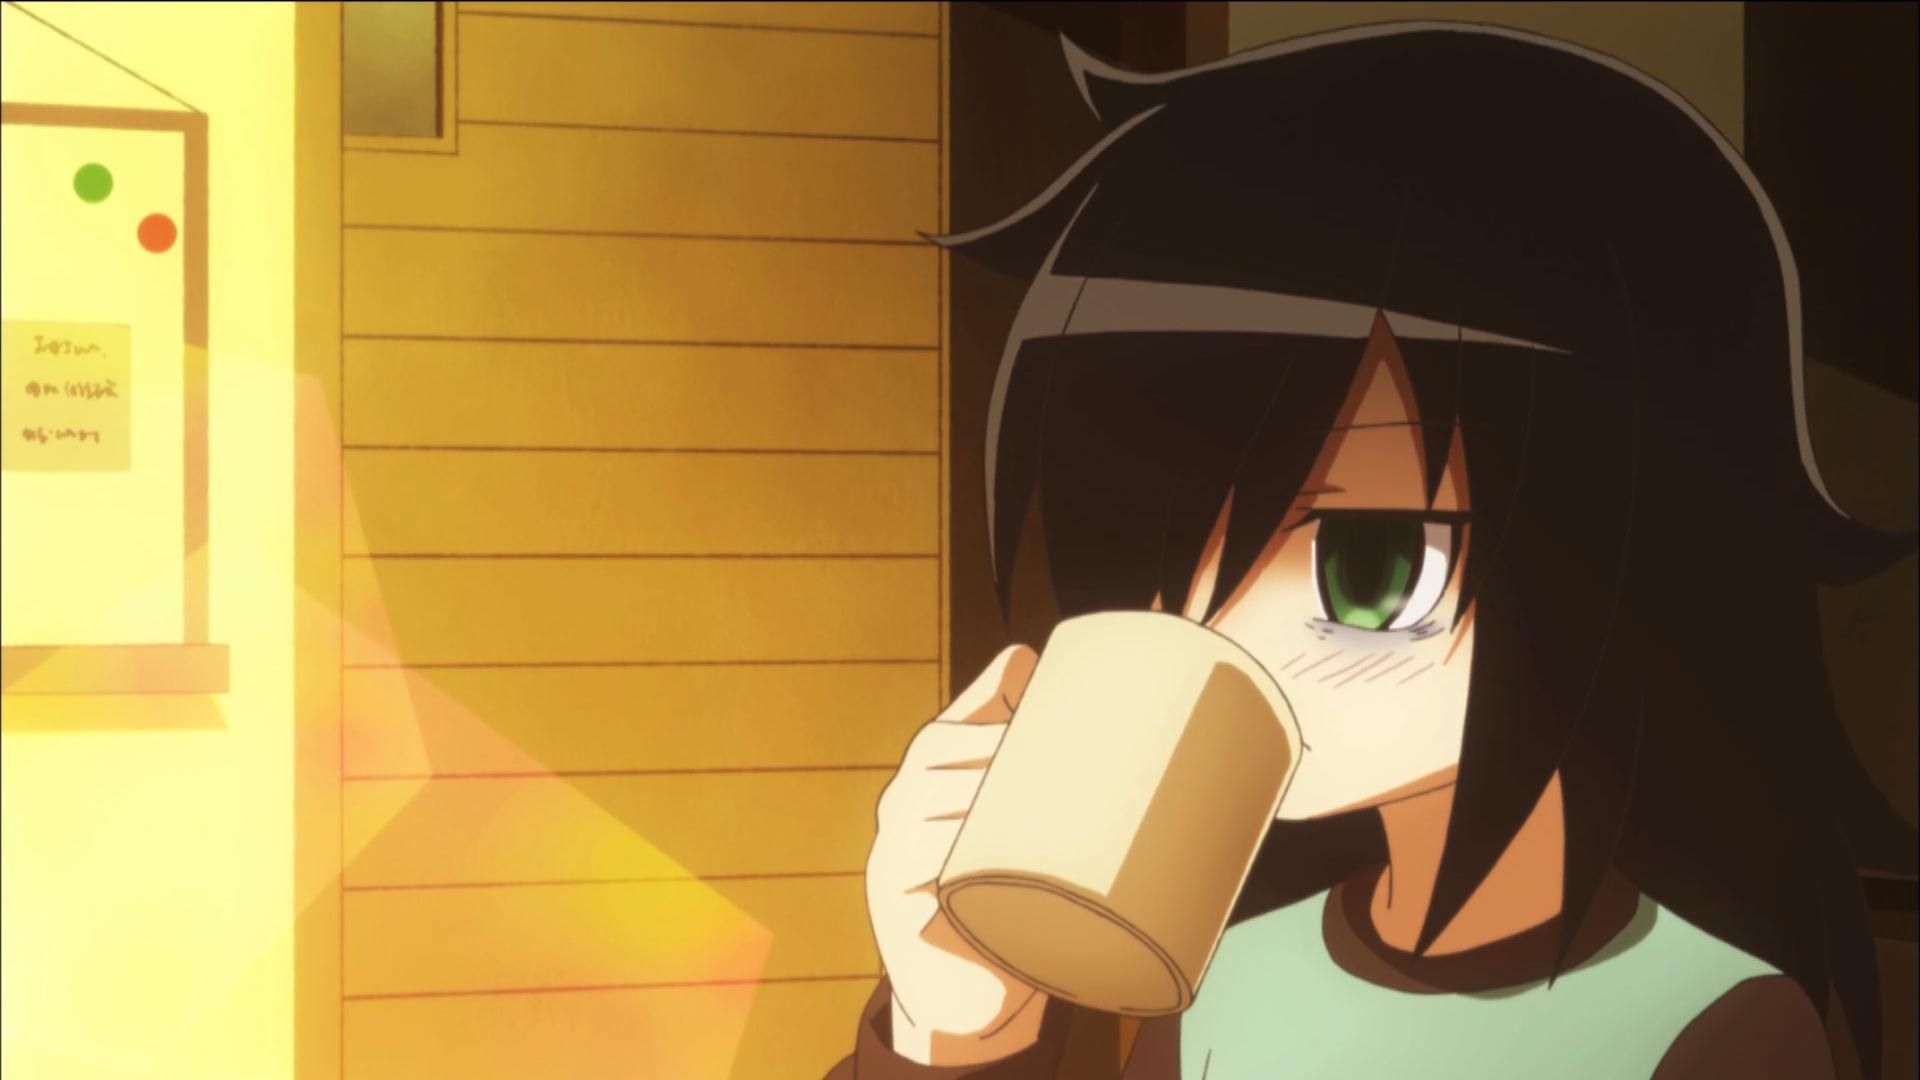 Anime Character Drinking Coffee Wallpapers - Wallpaper Cave